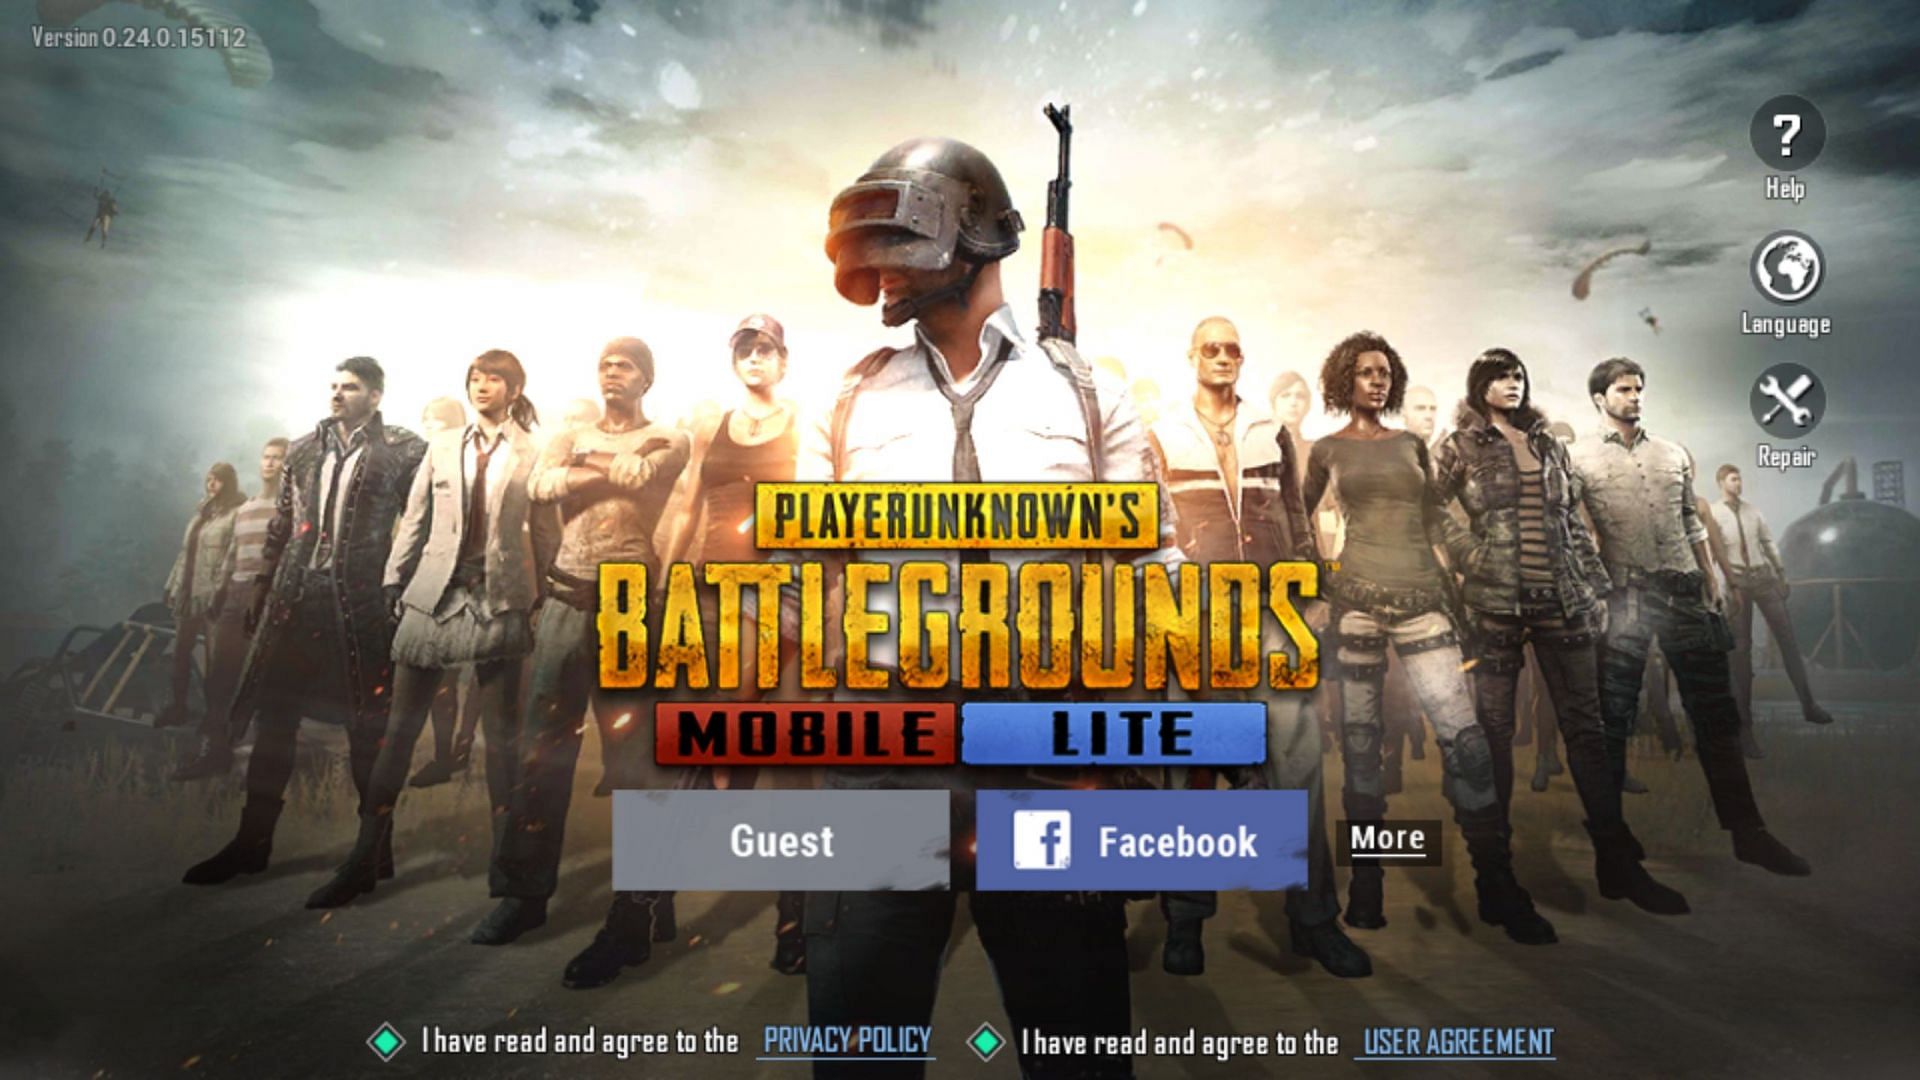 Open the game and sign in to enjoy playing the latest version of PUBG Mobile Lite (Image via Tencent)